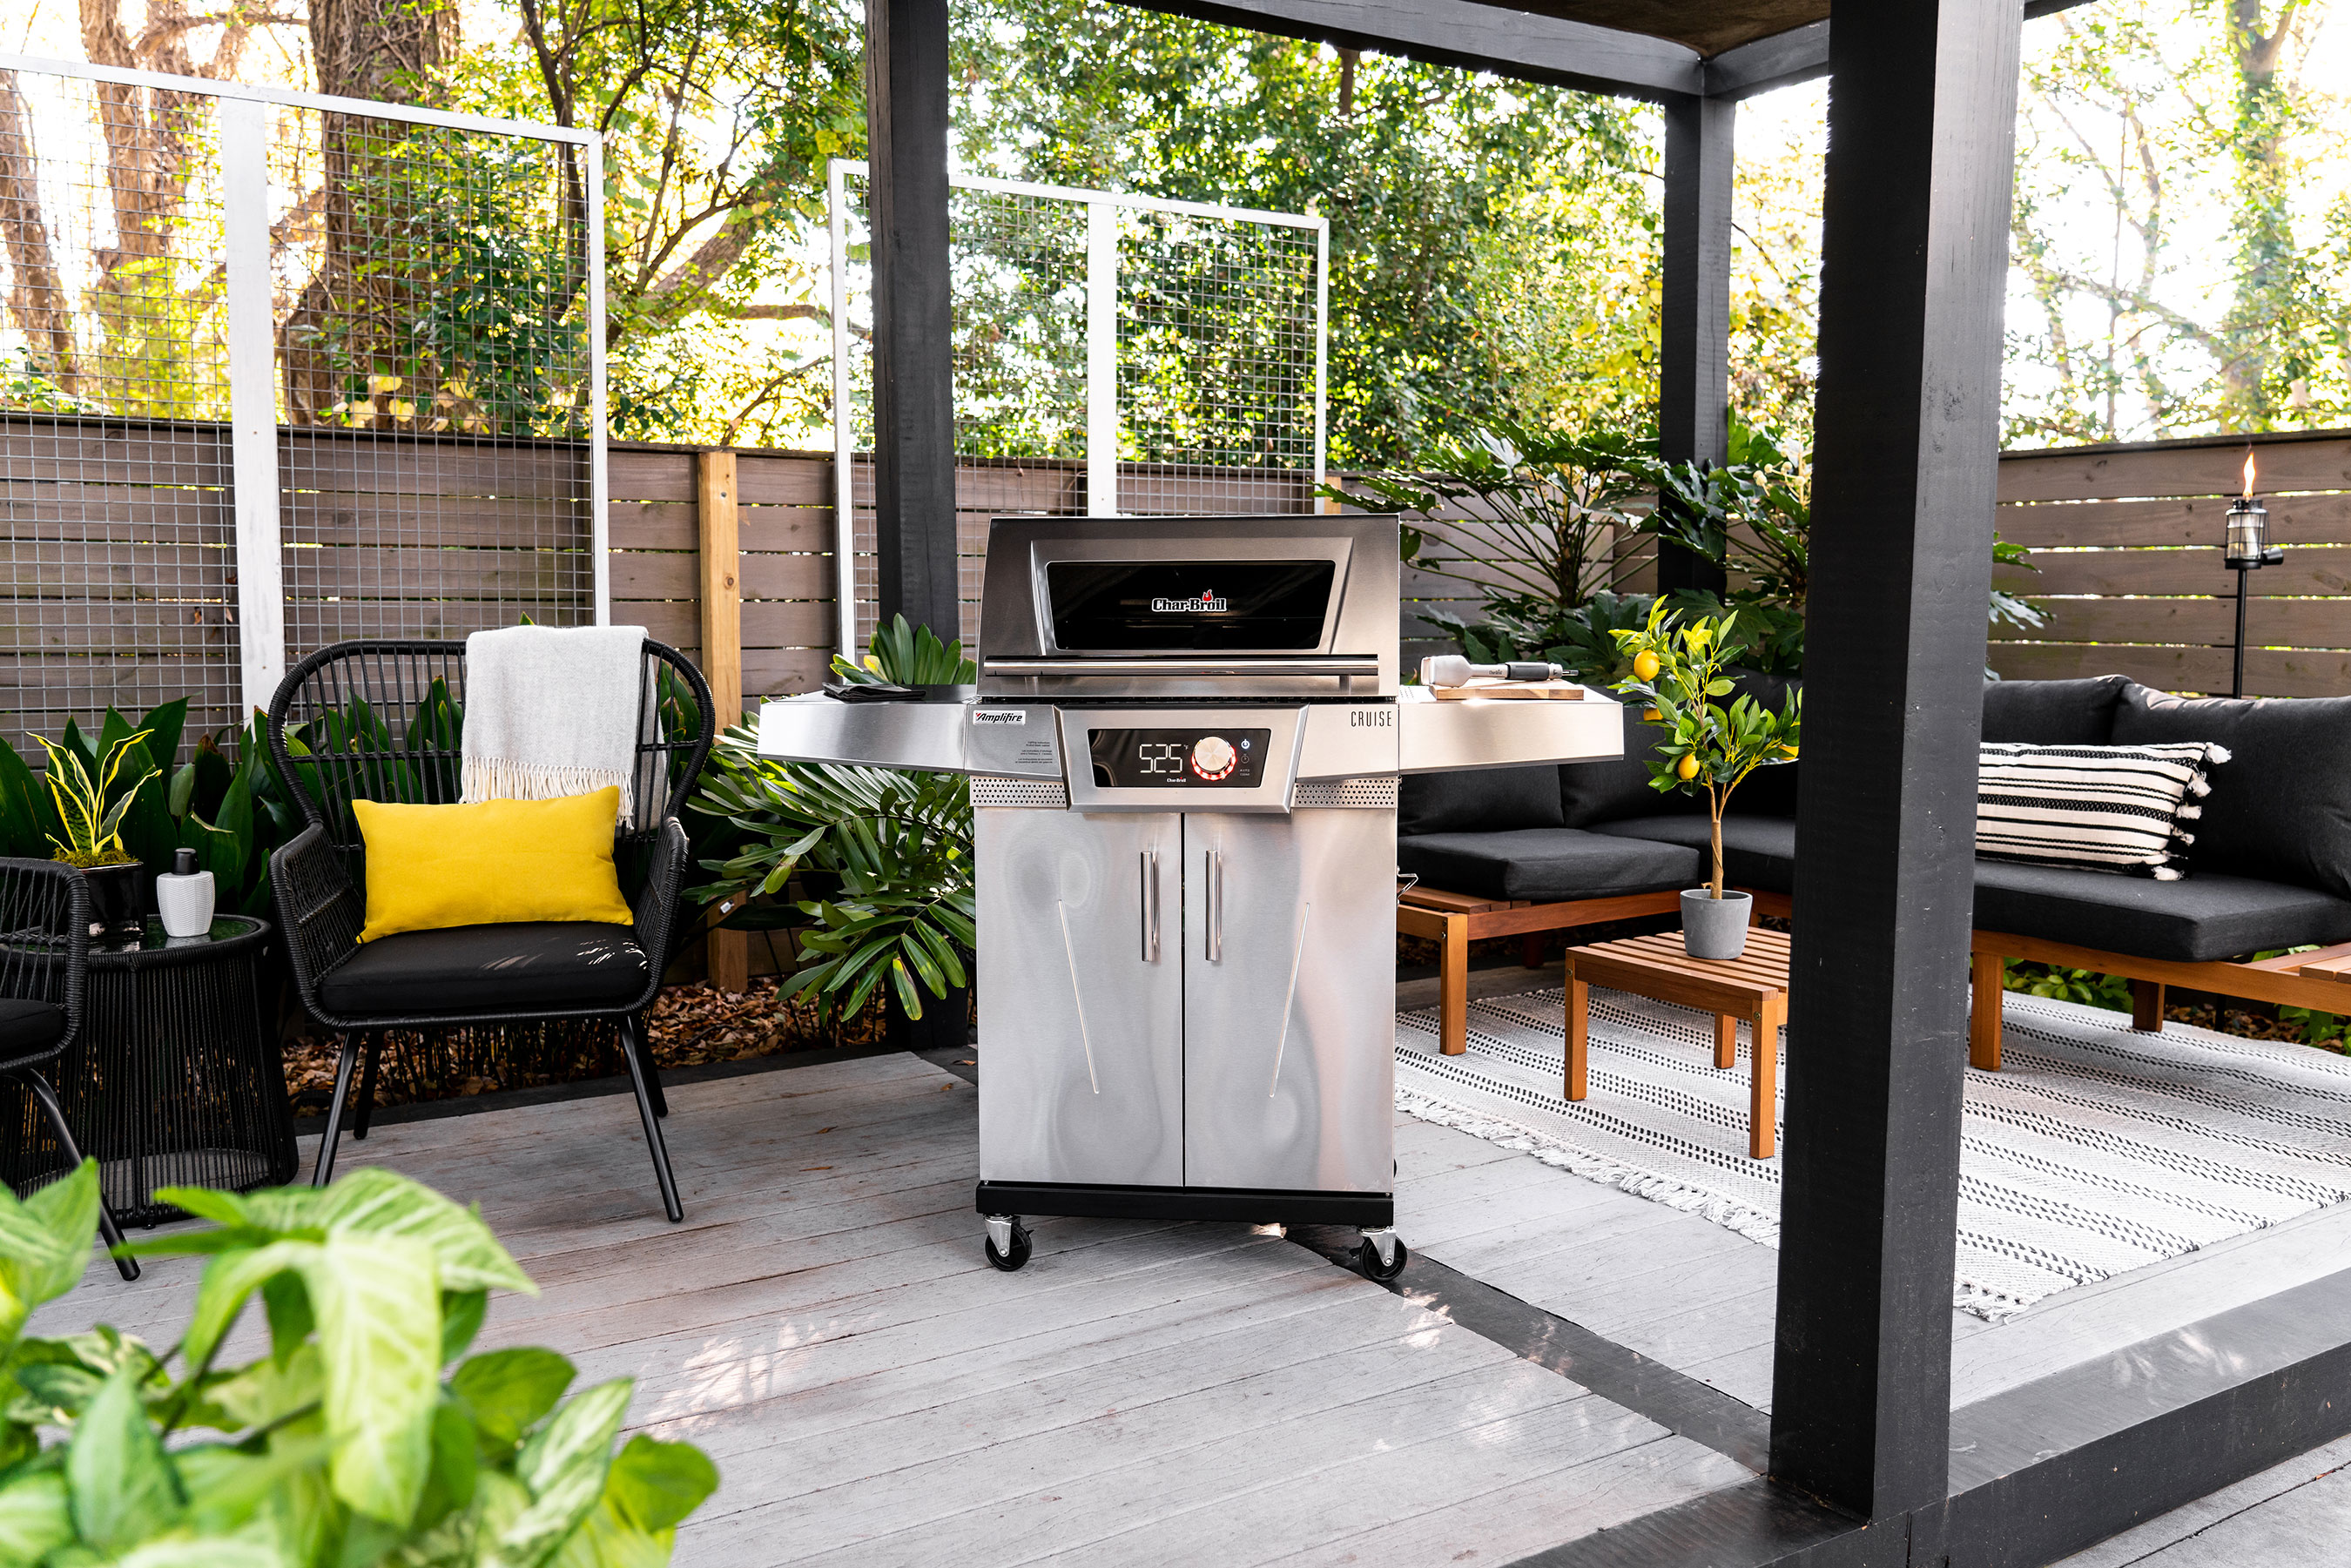 The grill’s built-in auto-calibration keeps the heat consistent as you cook, allowing you to grill things in a way you never thought possible.